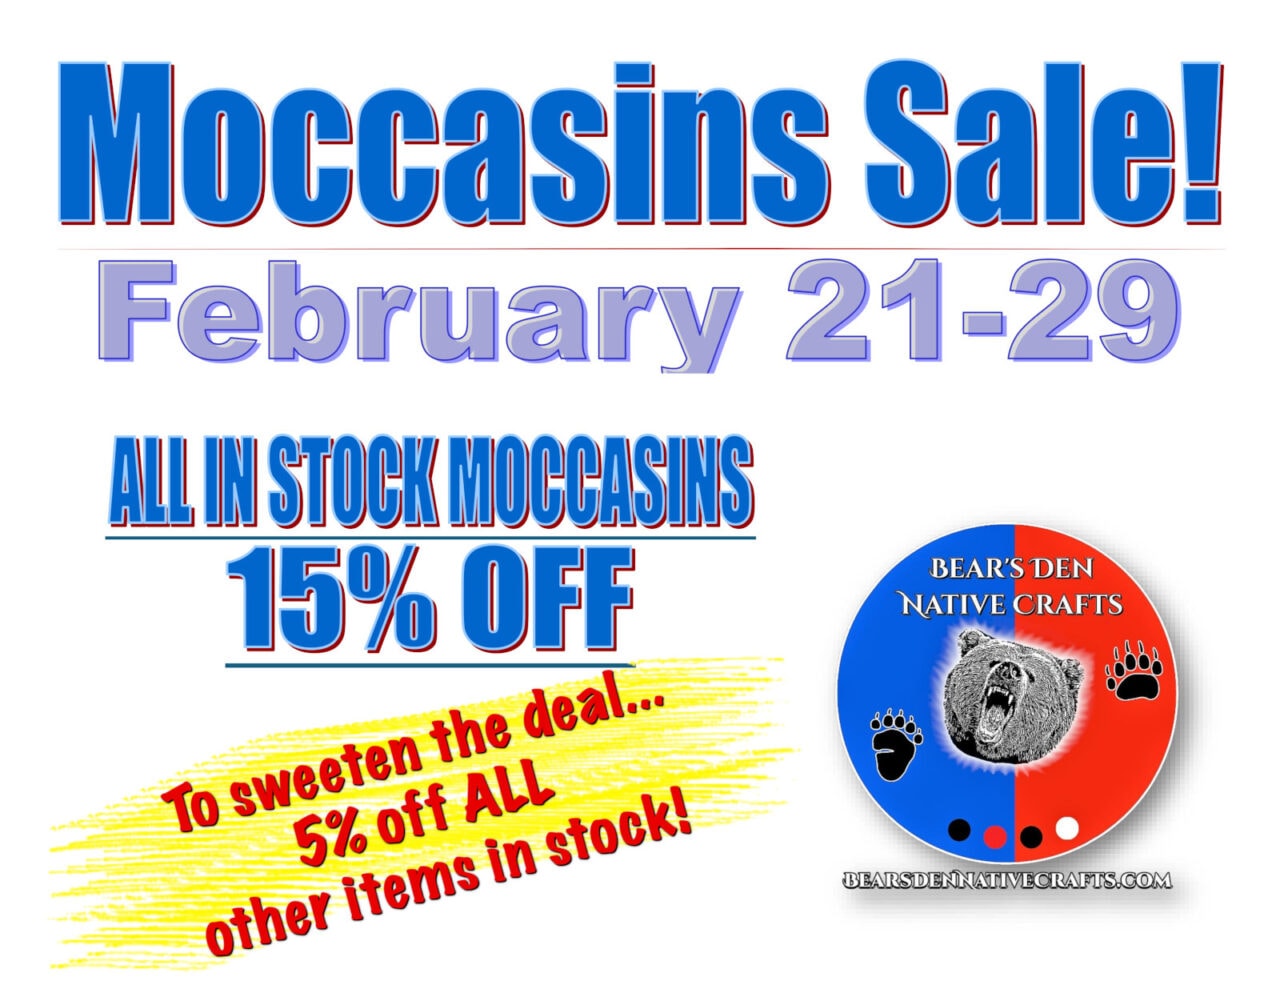 Moccasin sale - February 21 - 29